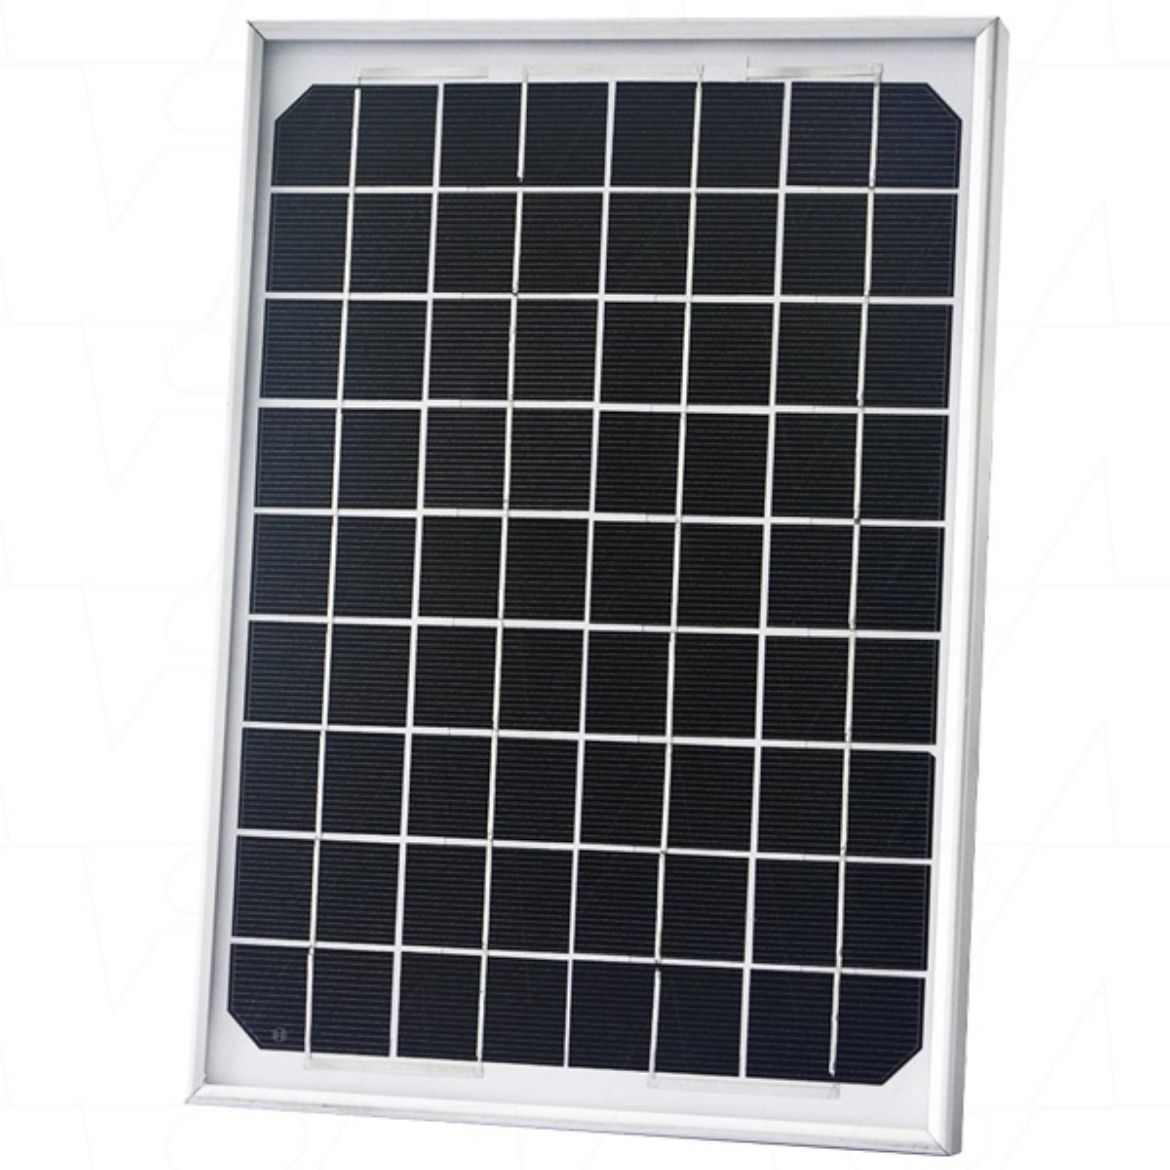 Picture of 12VOLT 10W 0.83A SY-M10W-8M SYMMETRY SOLAR MODULE WITH J-BOX W/ 8M OF 0.5MM2 CABLE